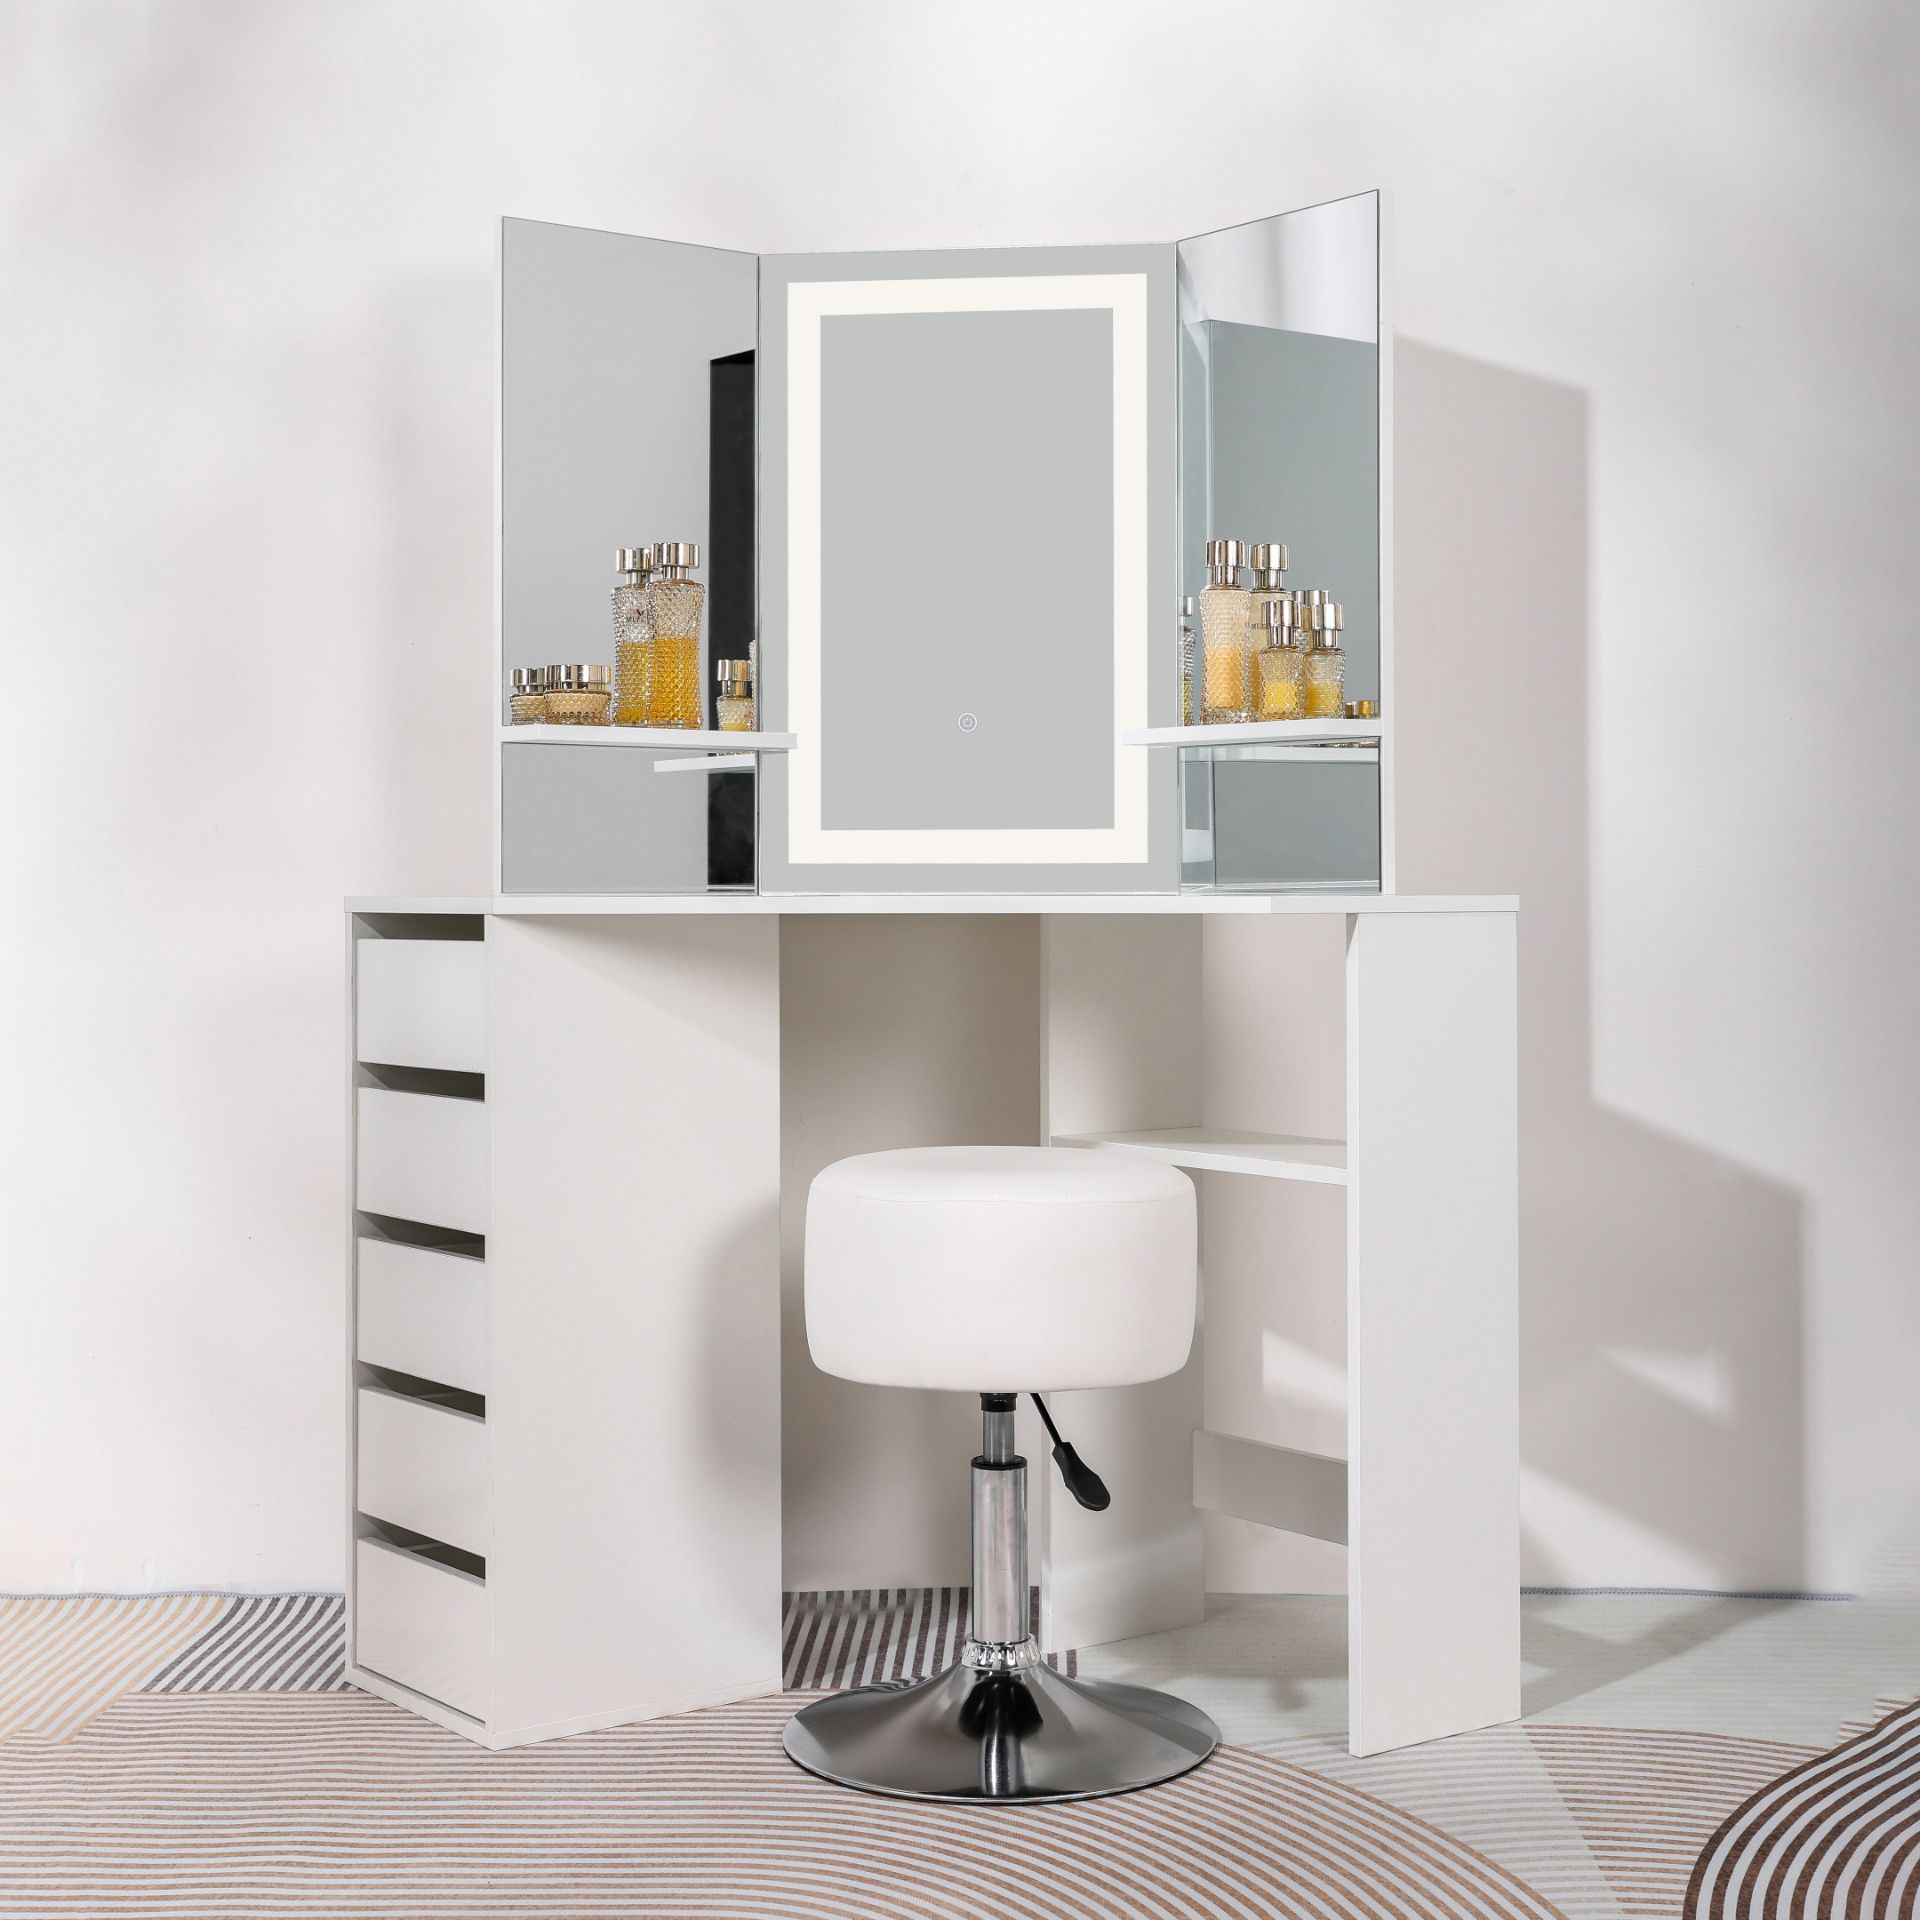 5 DRAWER MAKE UP CORNER DRESSING TABLE WITH TOUCH LED MIRROR AND STOOL - WHITE RRP £349.99 - Image 2 of 4